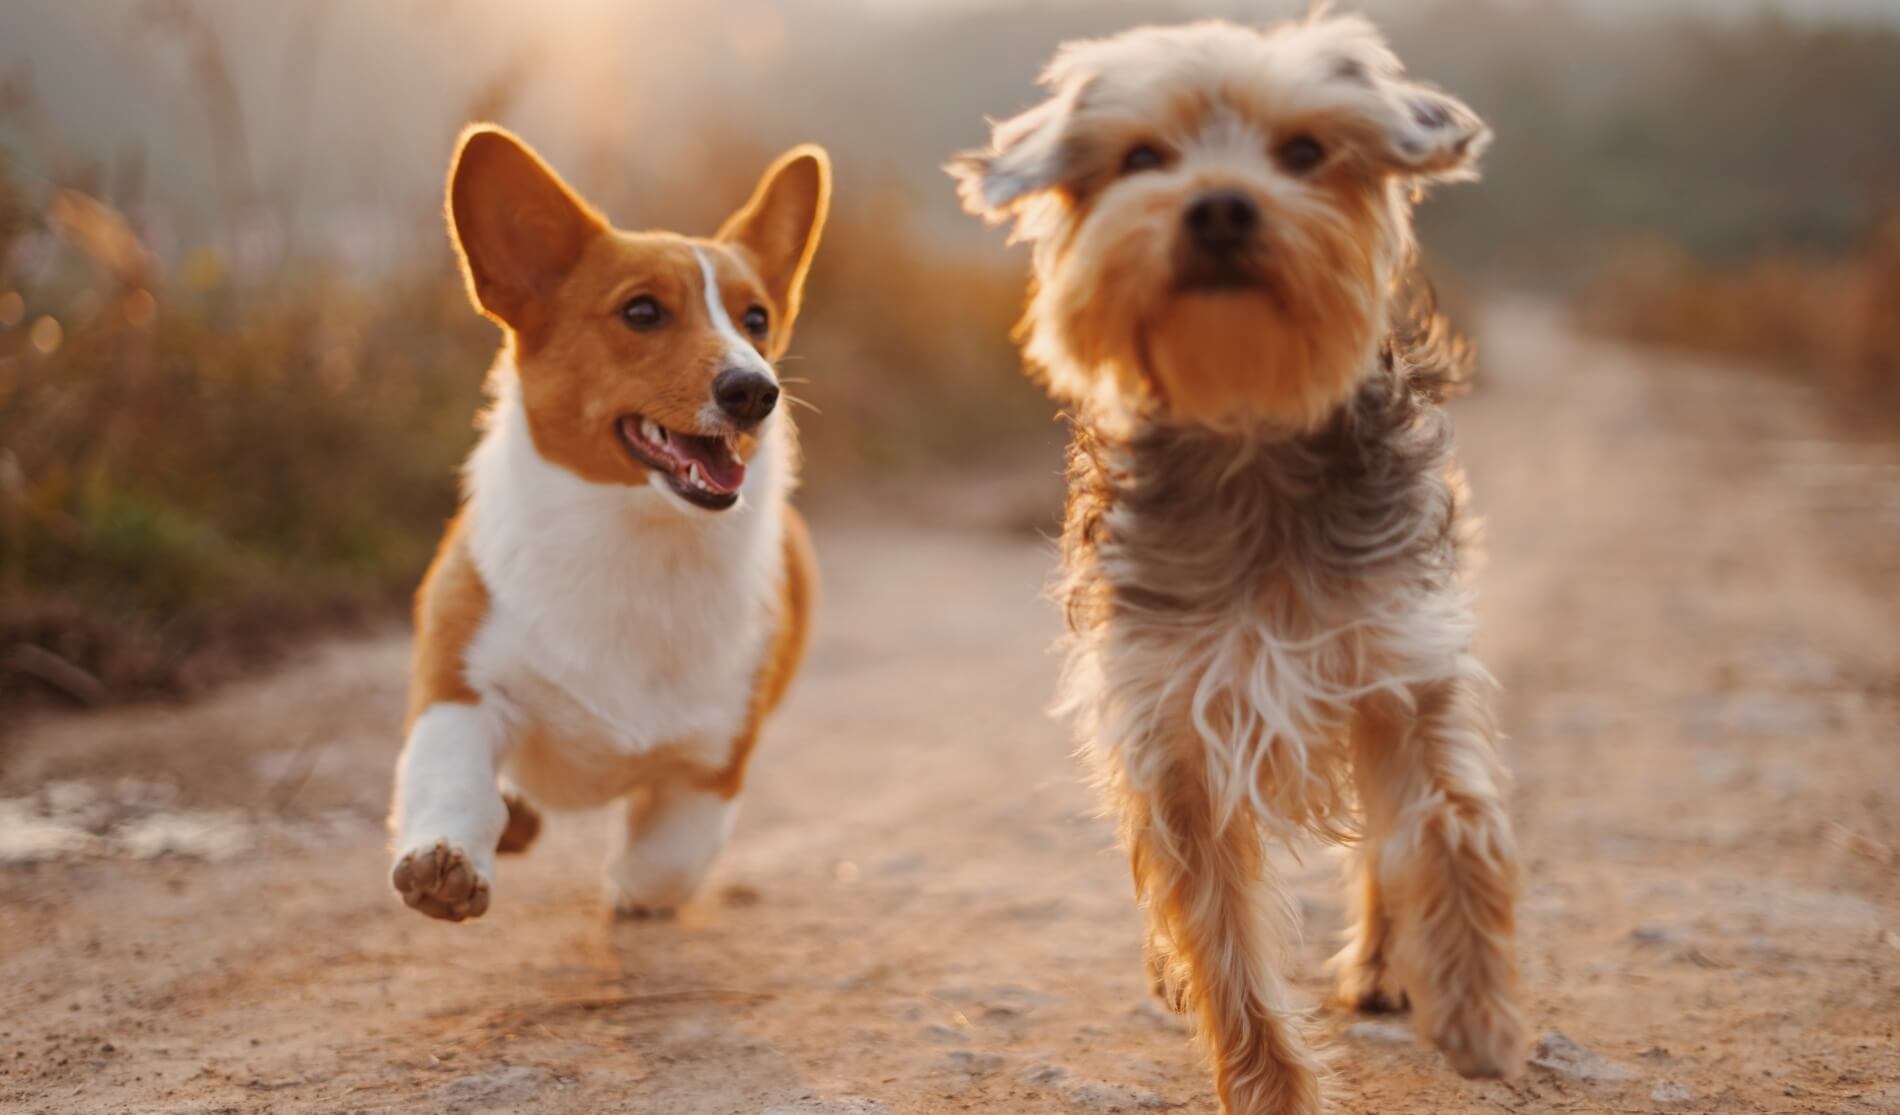 Two small dogs running next to each-other on a dirt track